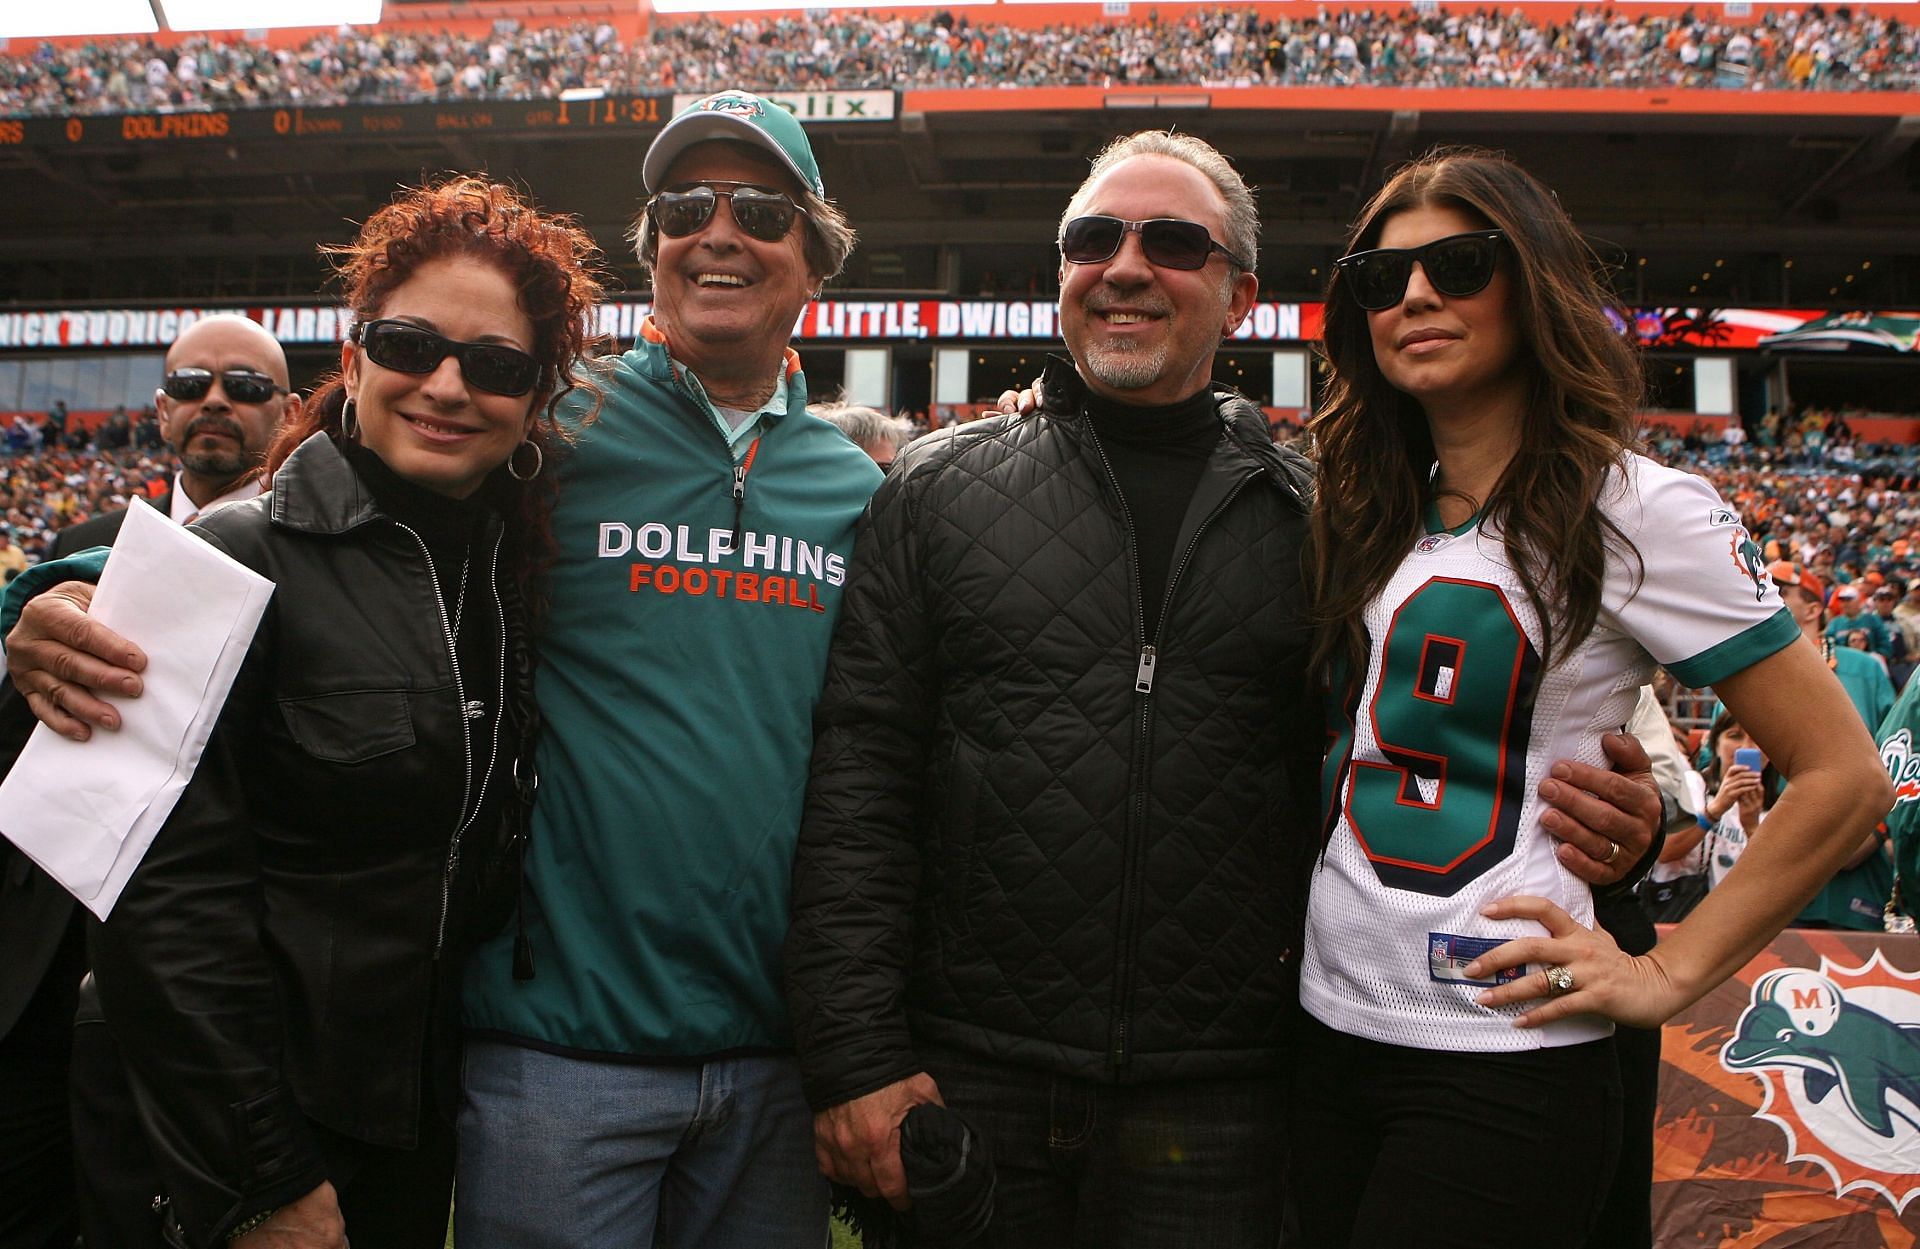 Members of the Miami Dolphins ownership group